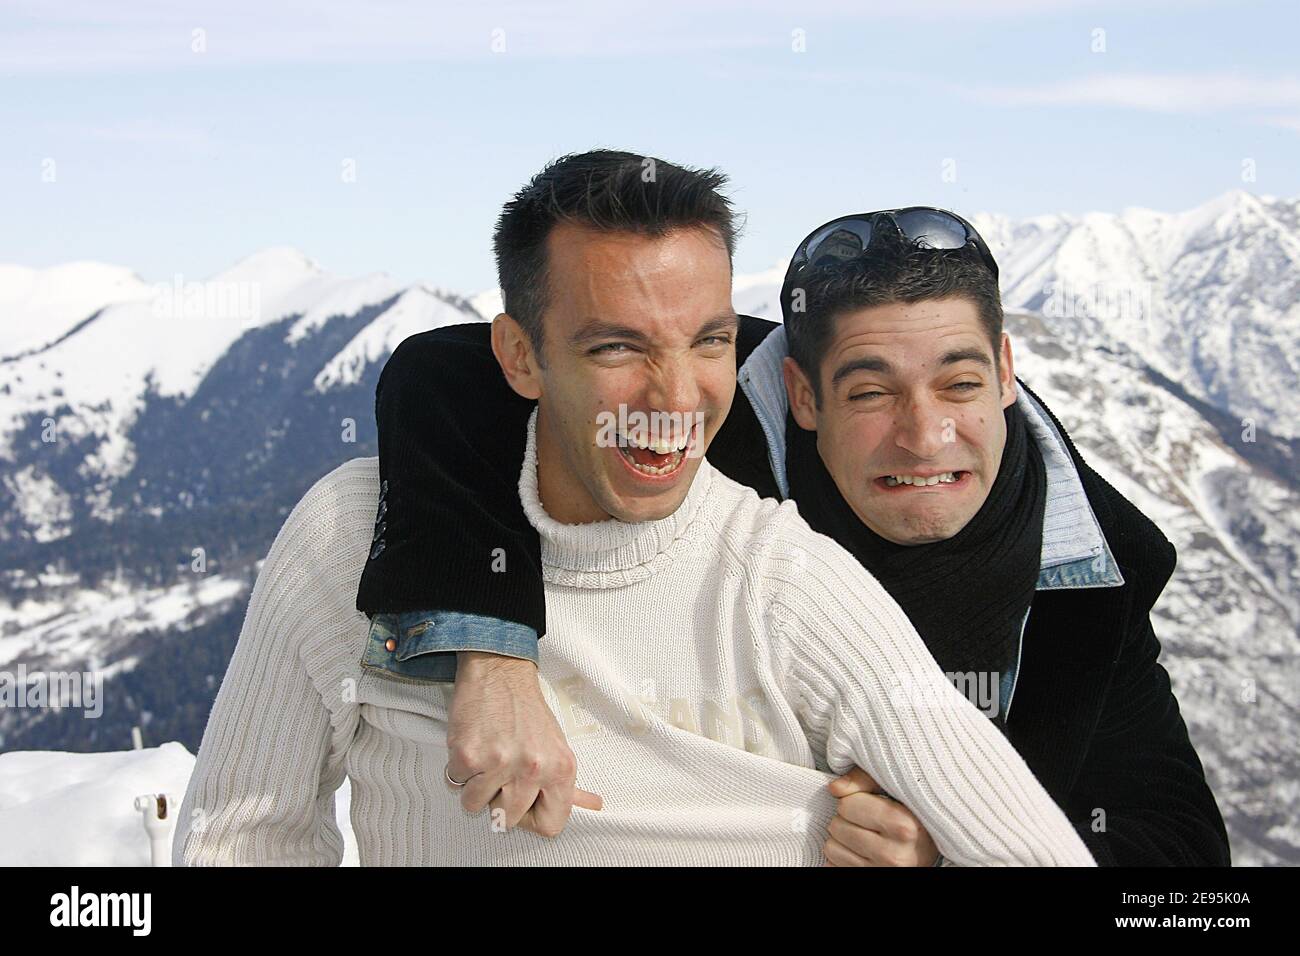 French humorists Doudi (aka David Strajmayster) (Blond hair or white shirt) and Pepess (aka Guillaume Carcaud) playing Samantha and Chantal in French TV show 'Samantha Oups' pose during the 8th International Television Film Festival of Luchon in French Pyrenees on February 1, 2006. Photo by Patrick Bernard/ABACAPRESS.COM Stock Photo